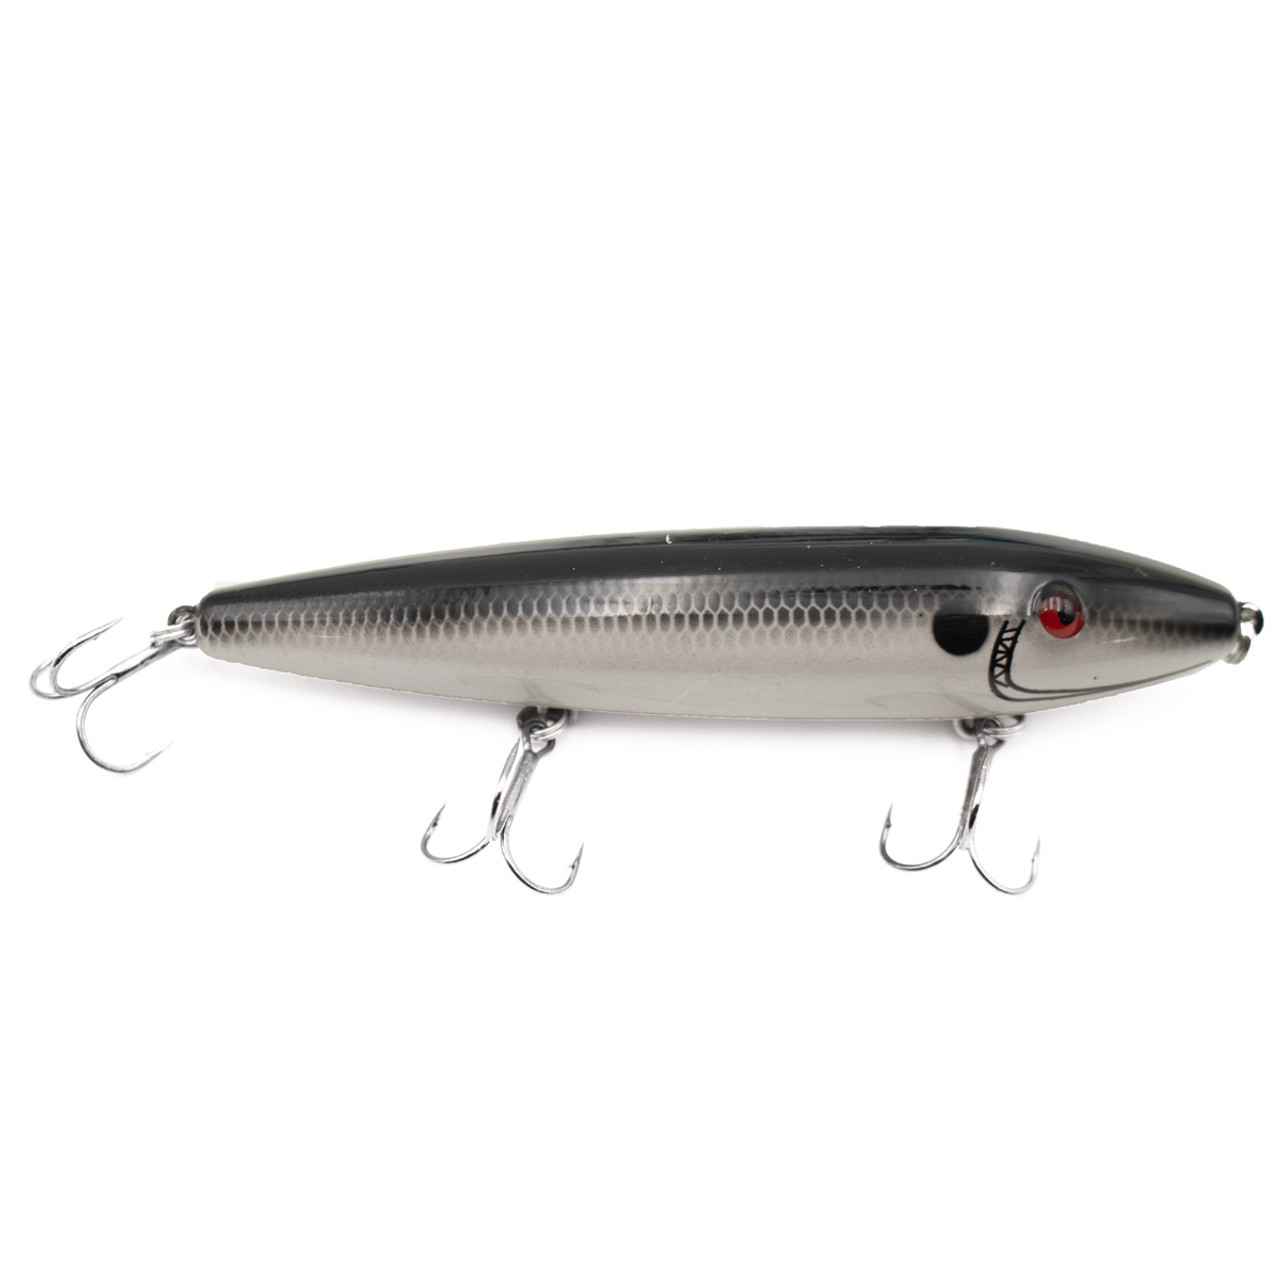 Rogers Hawg Stick 105 Topwater Fishing Lure